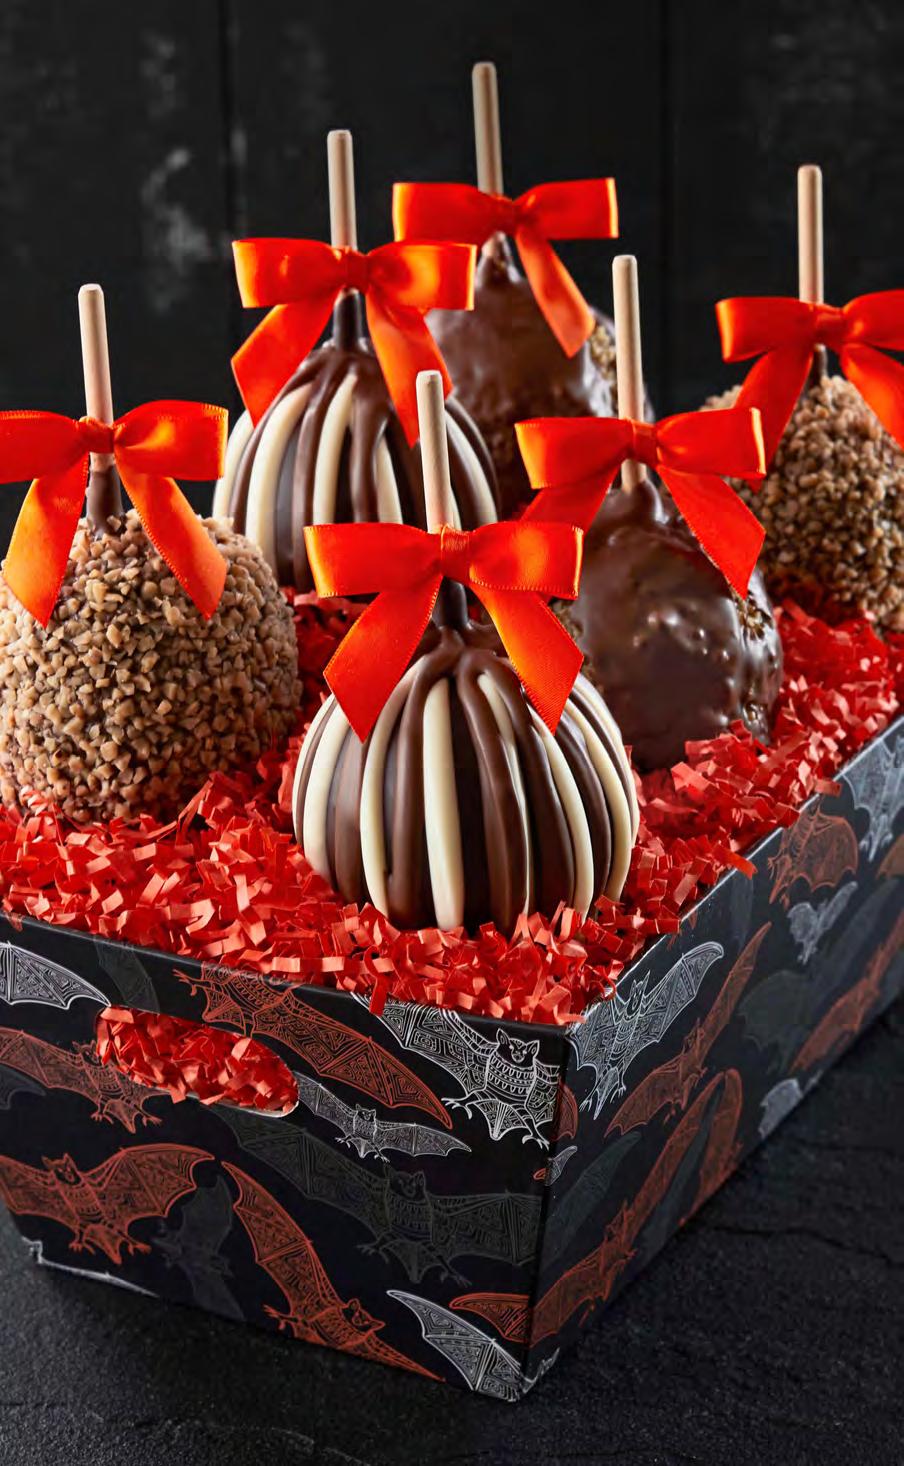 99 Spooky Six Petite Caramel Apple Tray Six spooky chocolate-dipped Petite Caramel Apples are dressed up for Halloween with costumes that include fun candies and contrasting chocolate details.